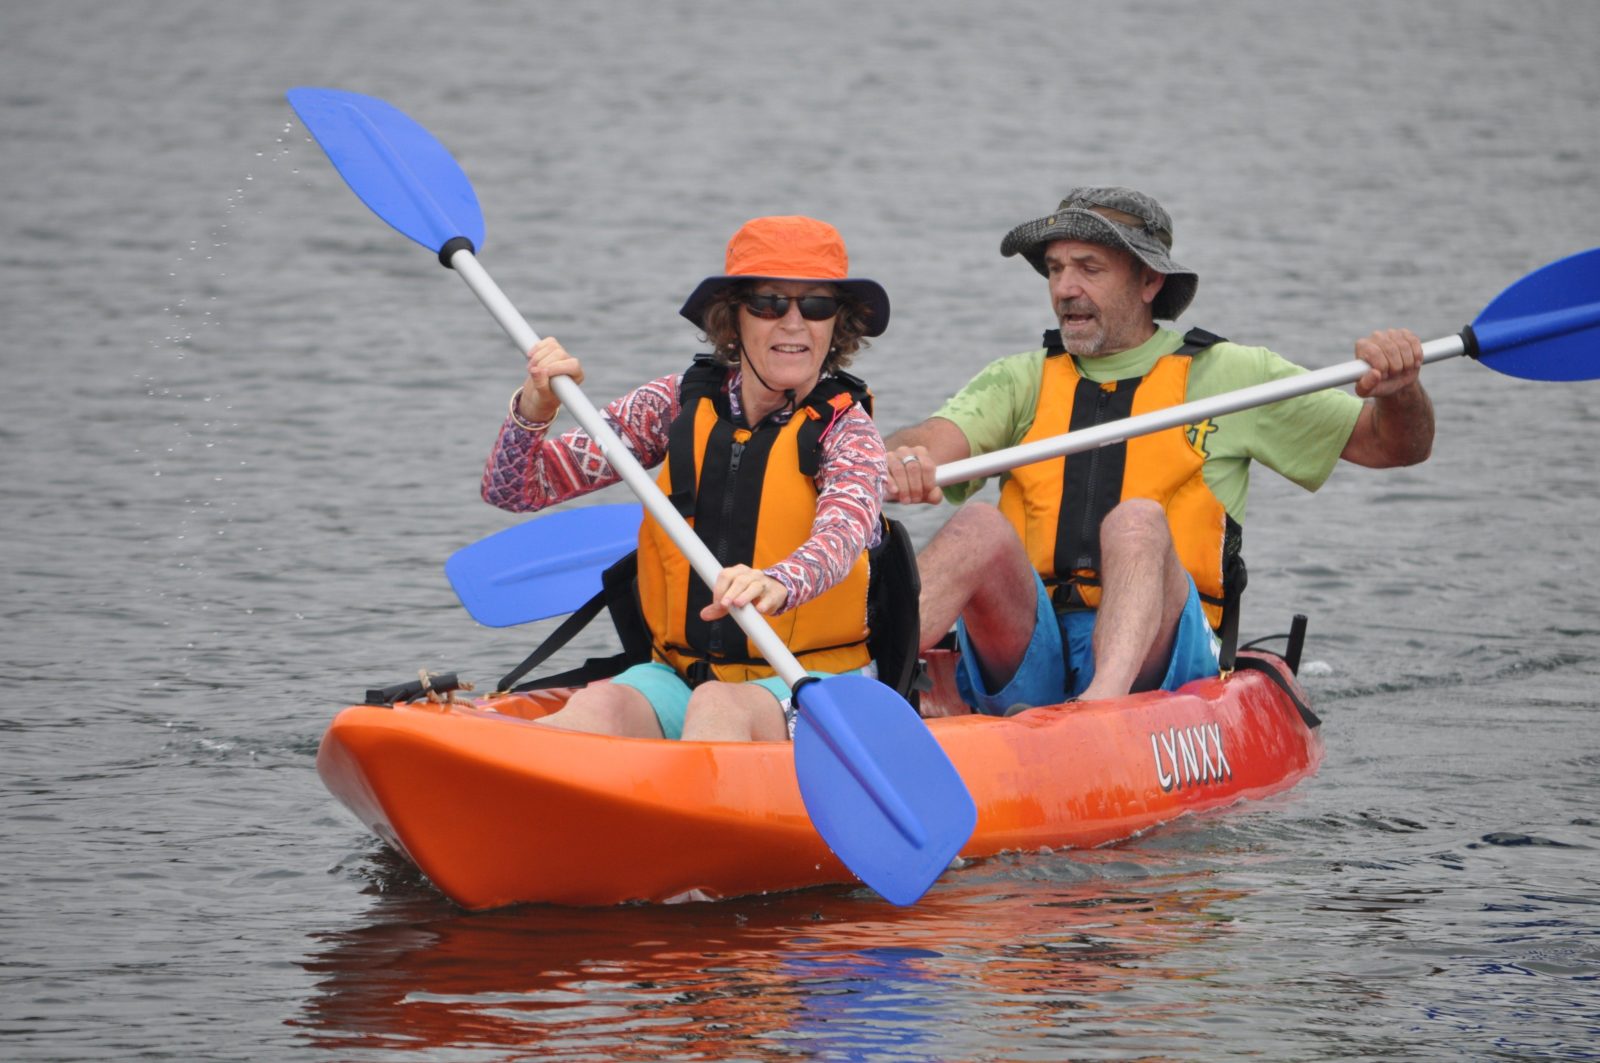 Nelligen Kayak hire. Double kayaks available for hire on the Clyde River